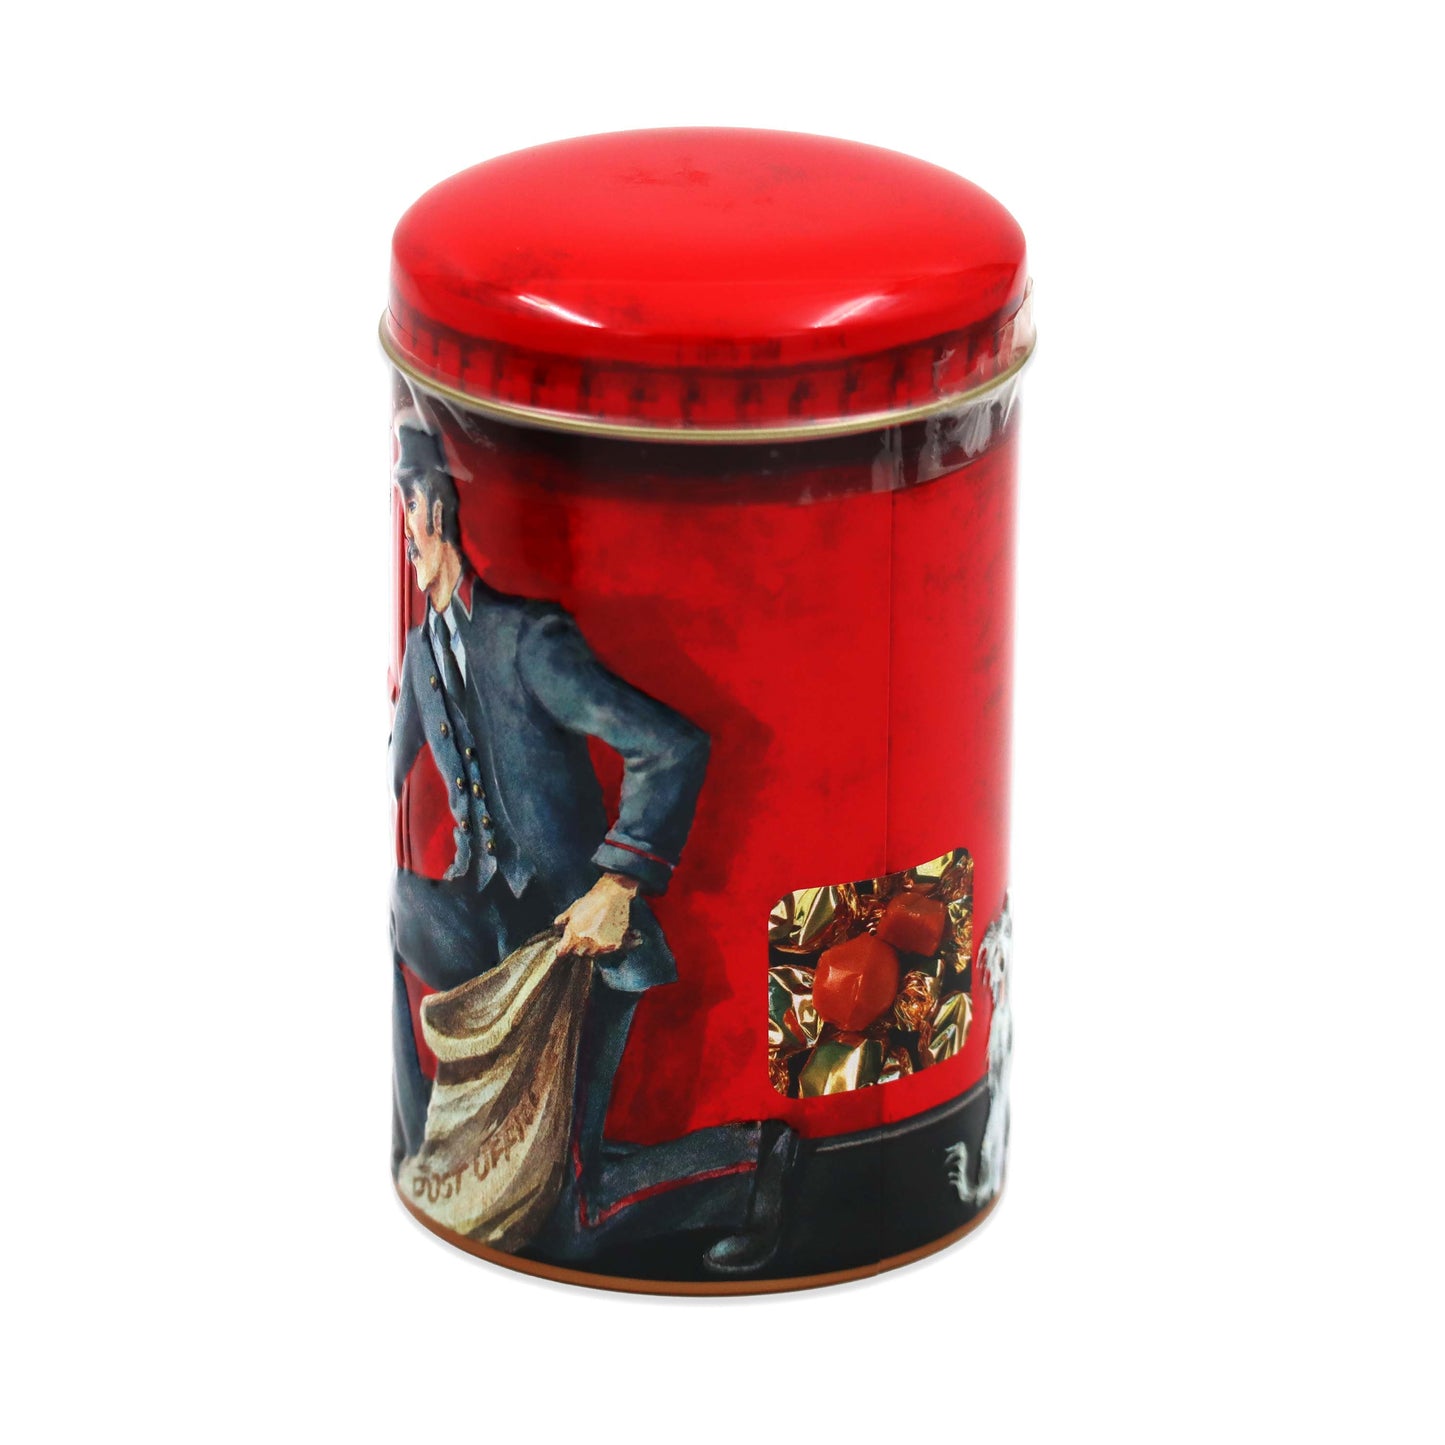 English Toffee in a Postbox Gift Caddy